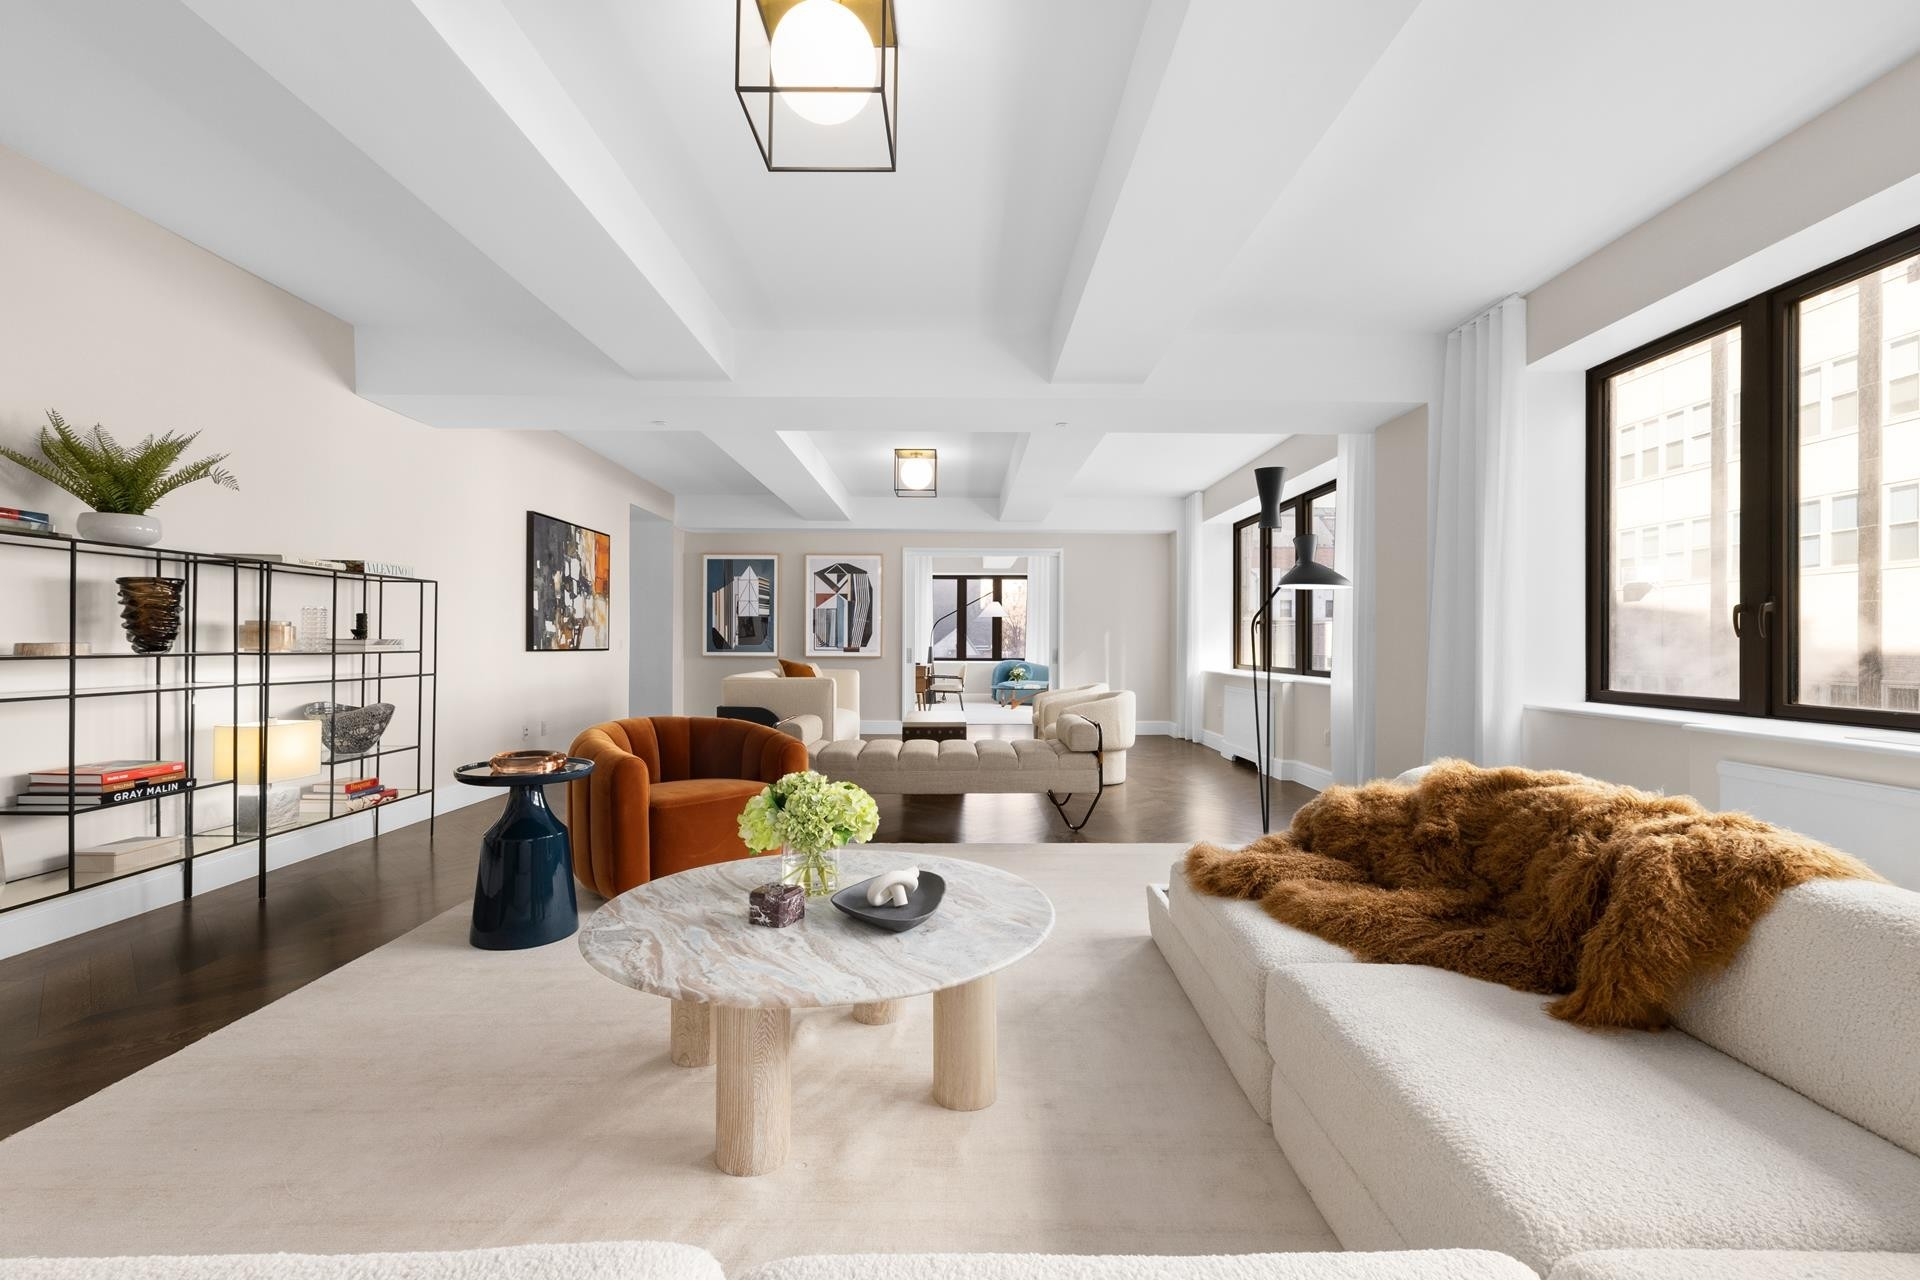 Condominium for Sale at The Boutique At Gra, 220 E 20TH ST, 4 Gramercy Park, New York, New York 10003